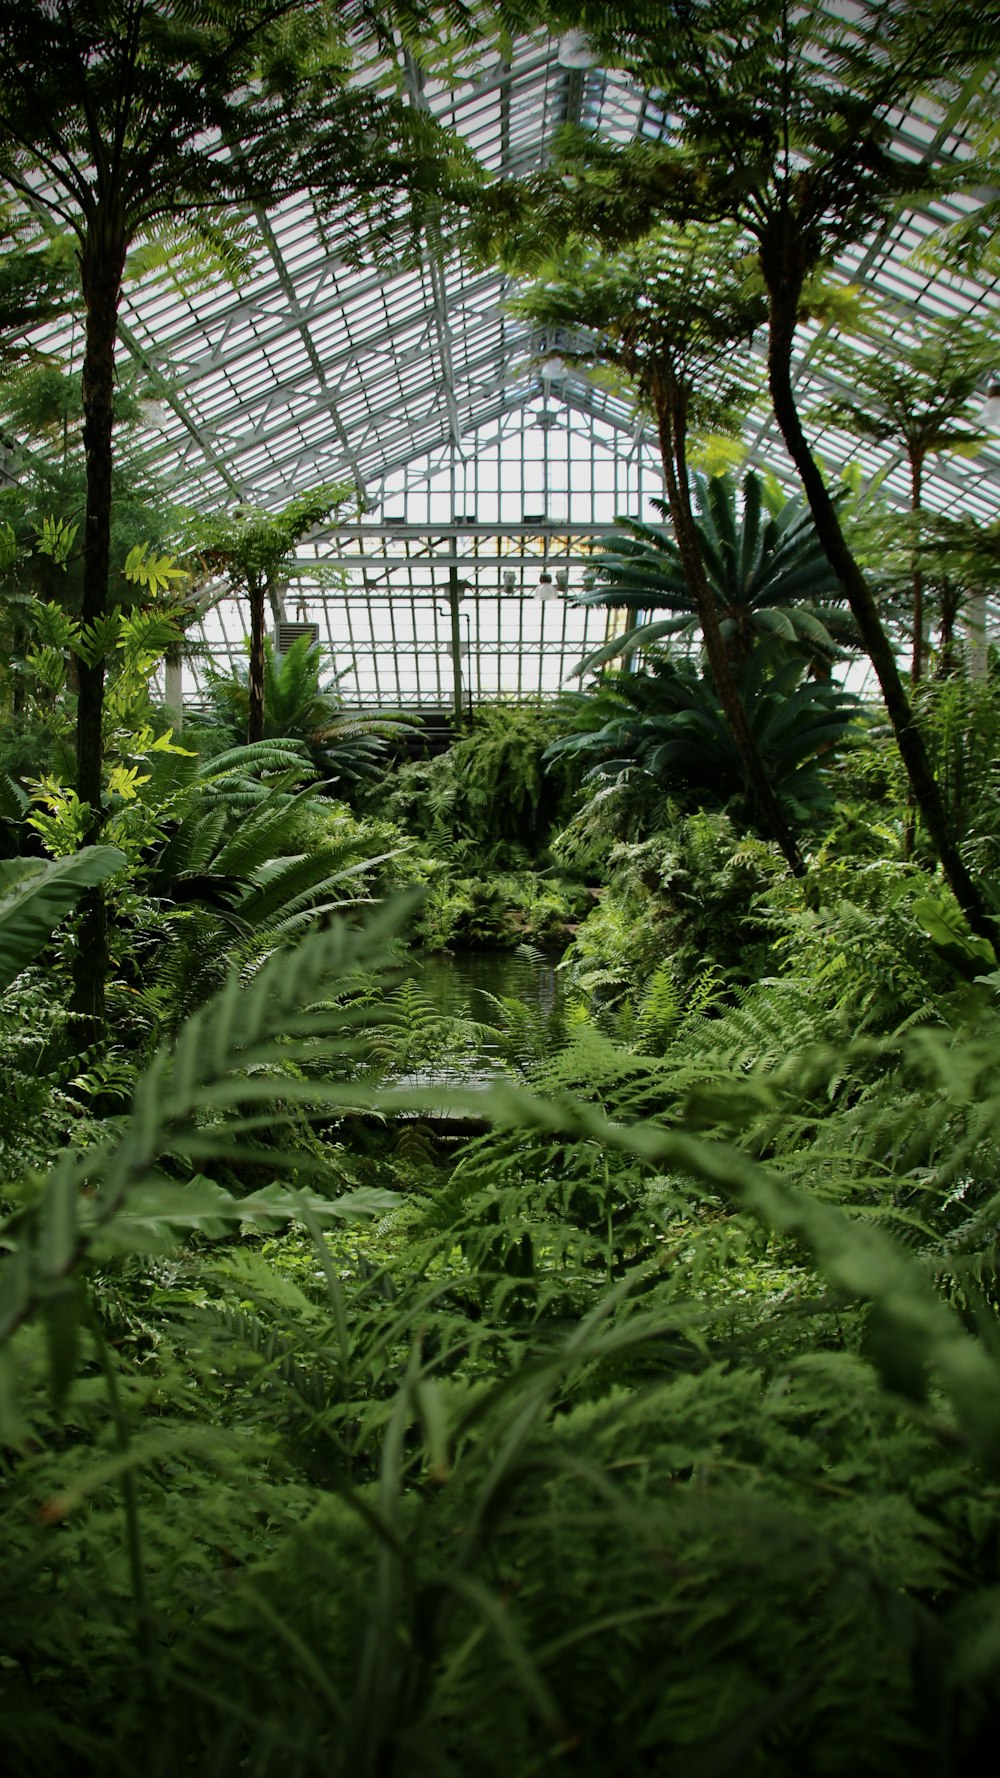 the inside of a greenhouse with lots of trees and plants